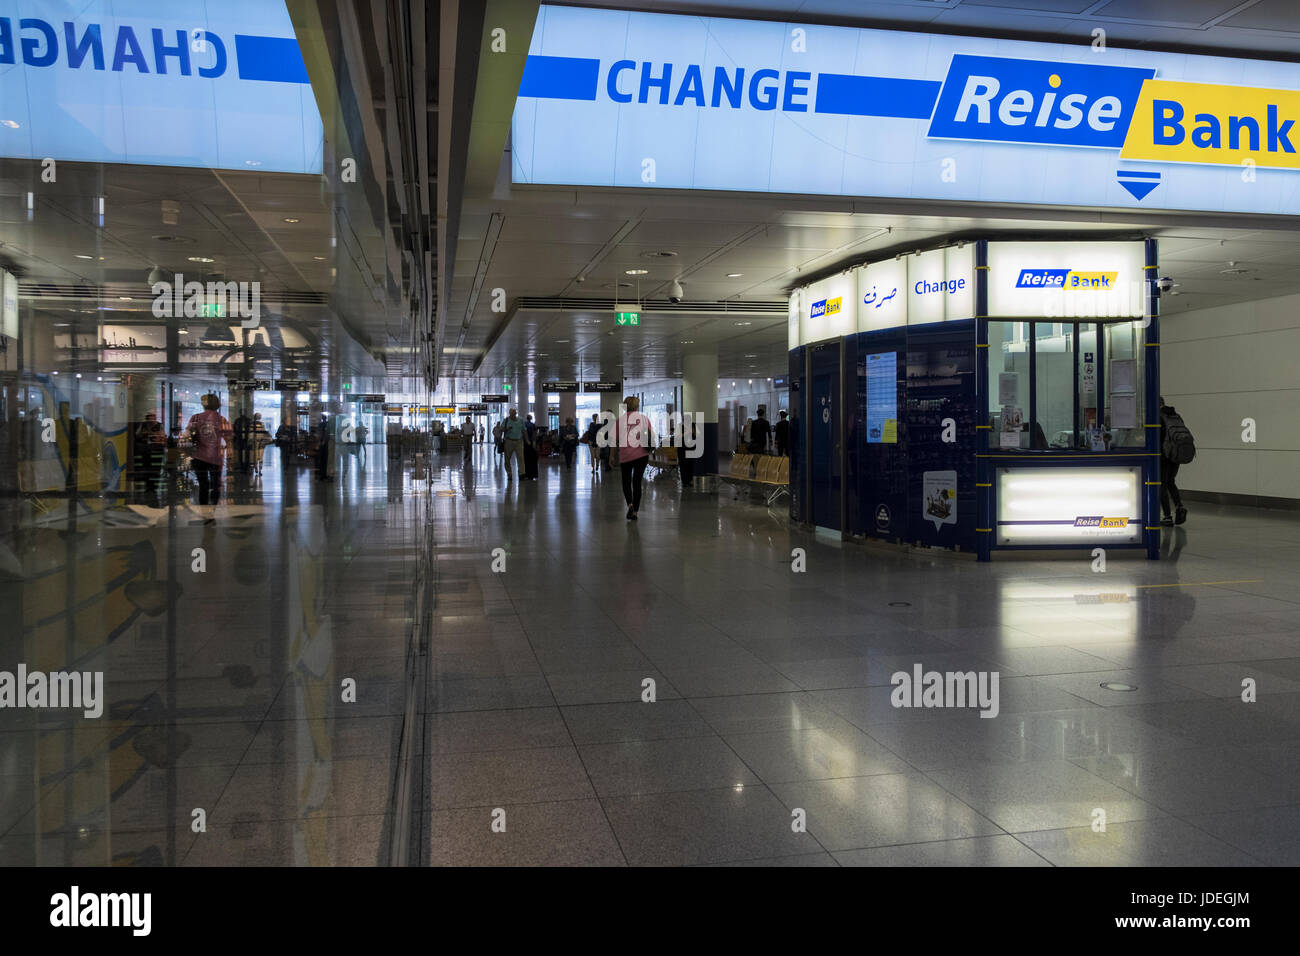 Reise bank currency exchange kiosk at the entrance to Munich airport, Germany Stock Photo